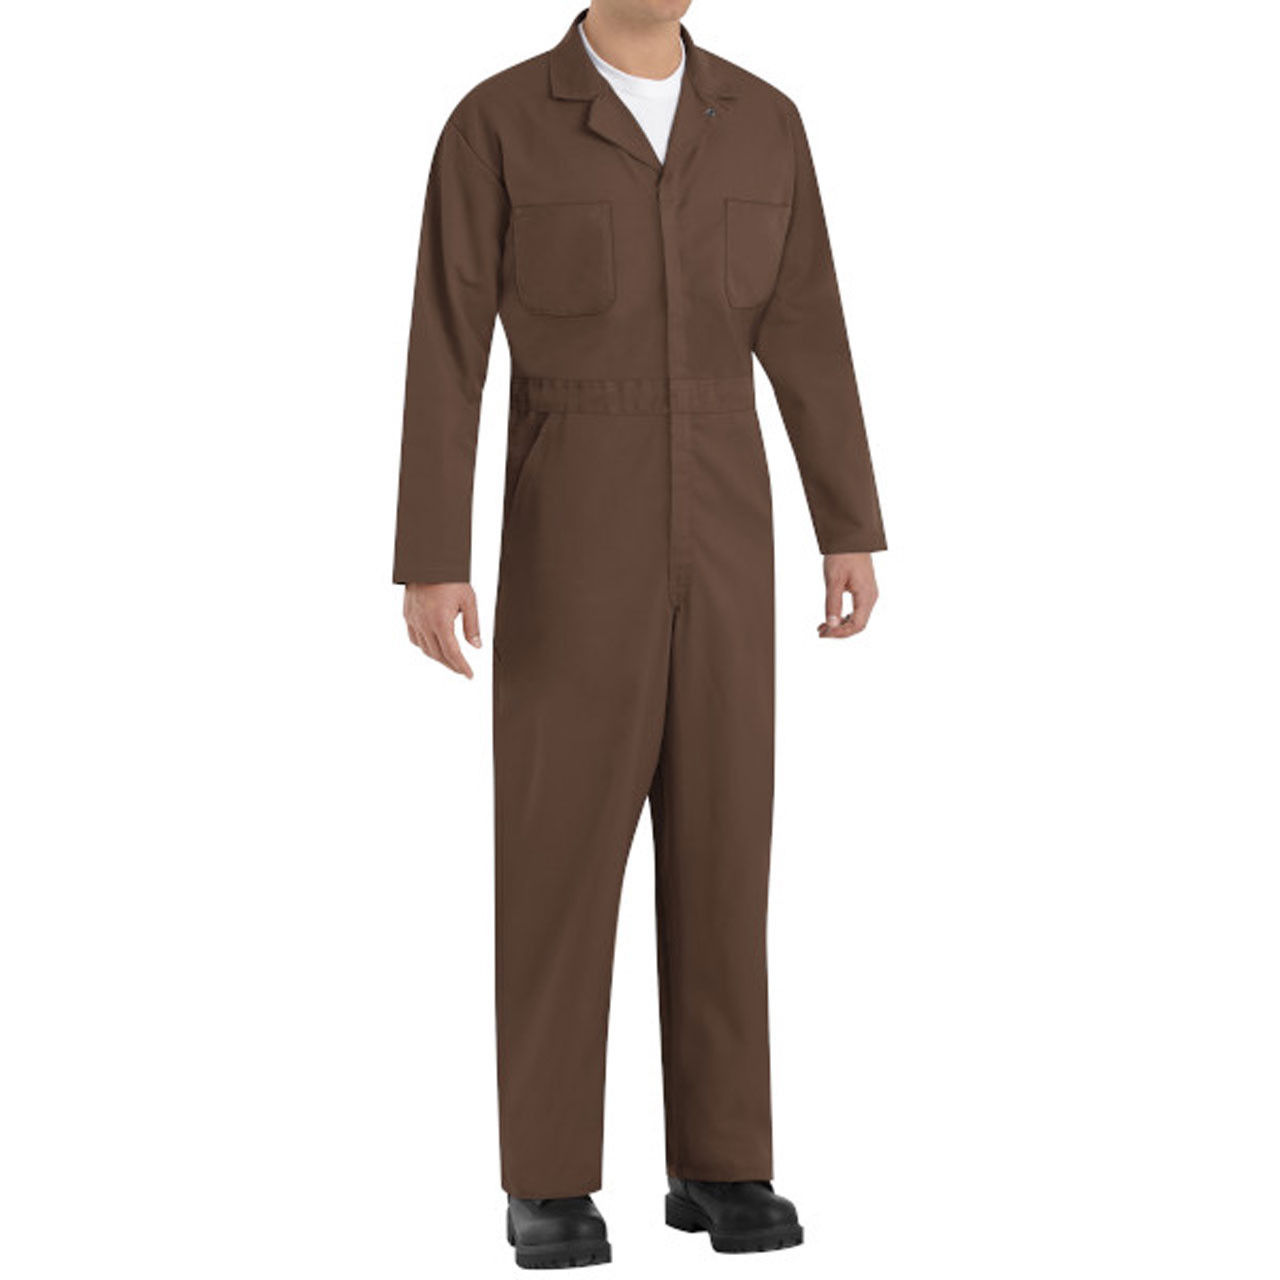 Where do the brown coveralls ship from?